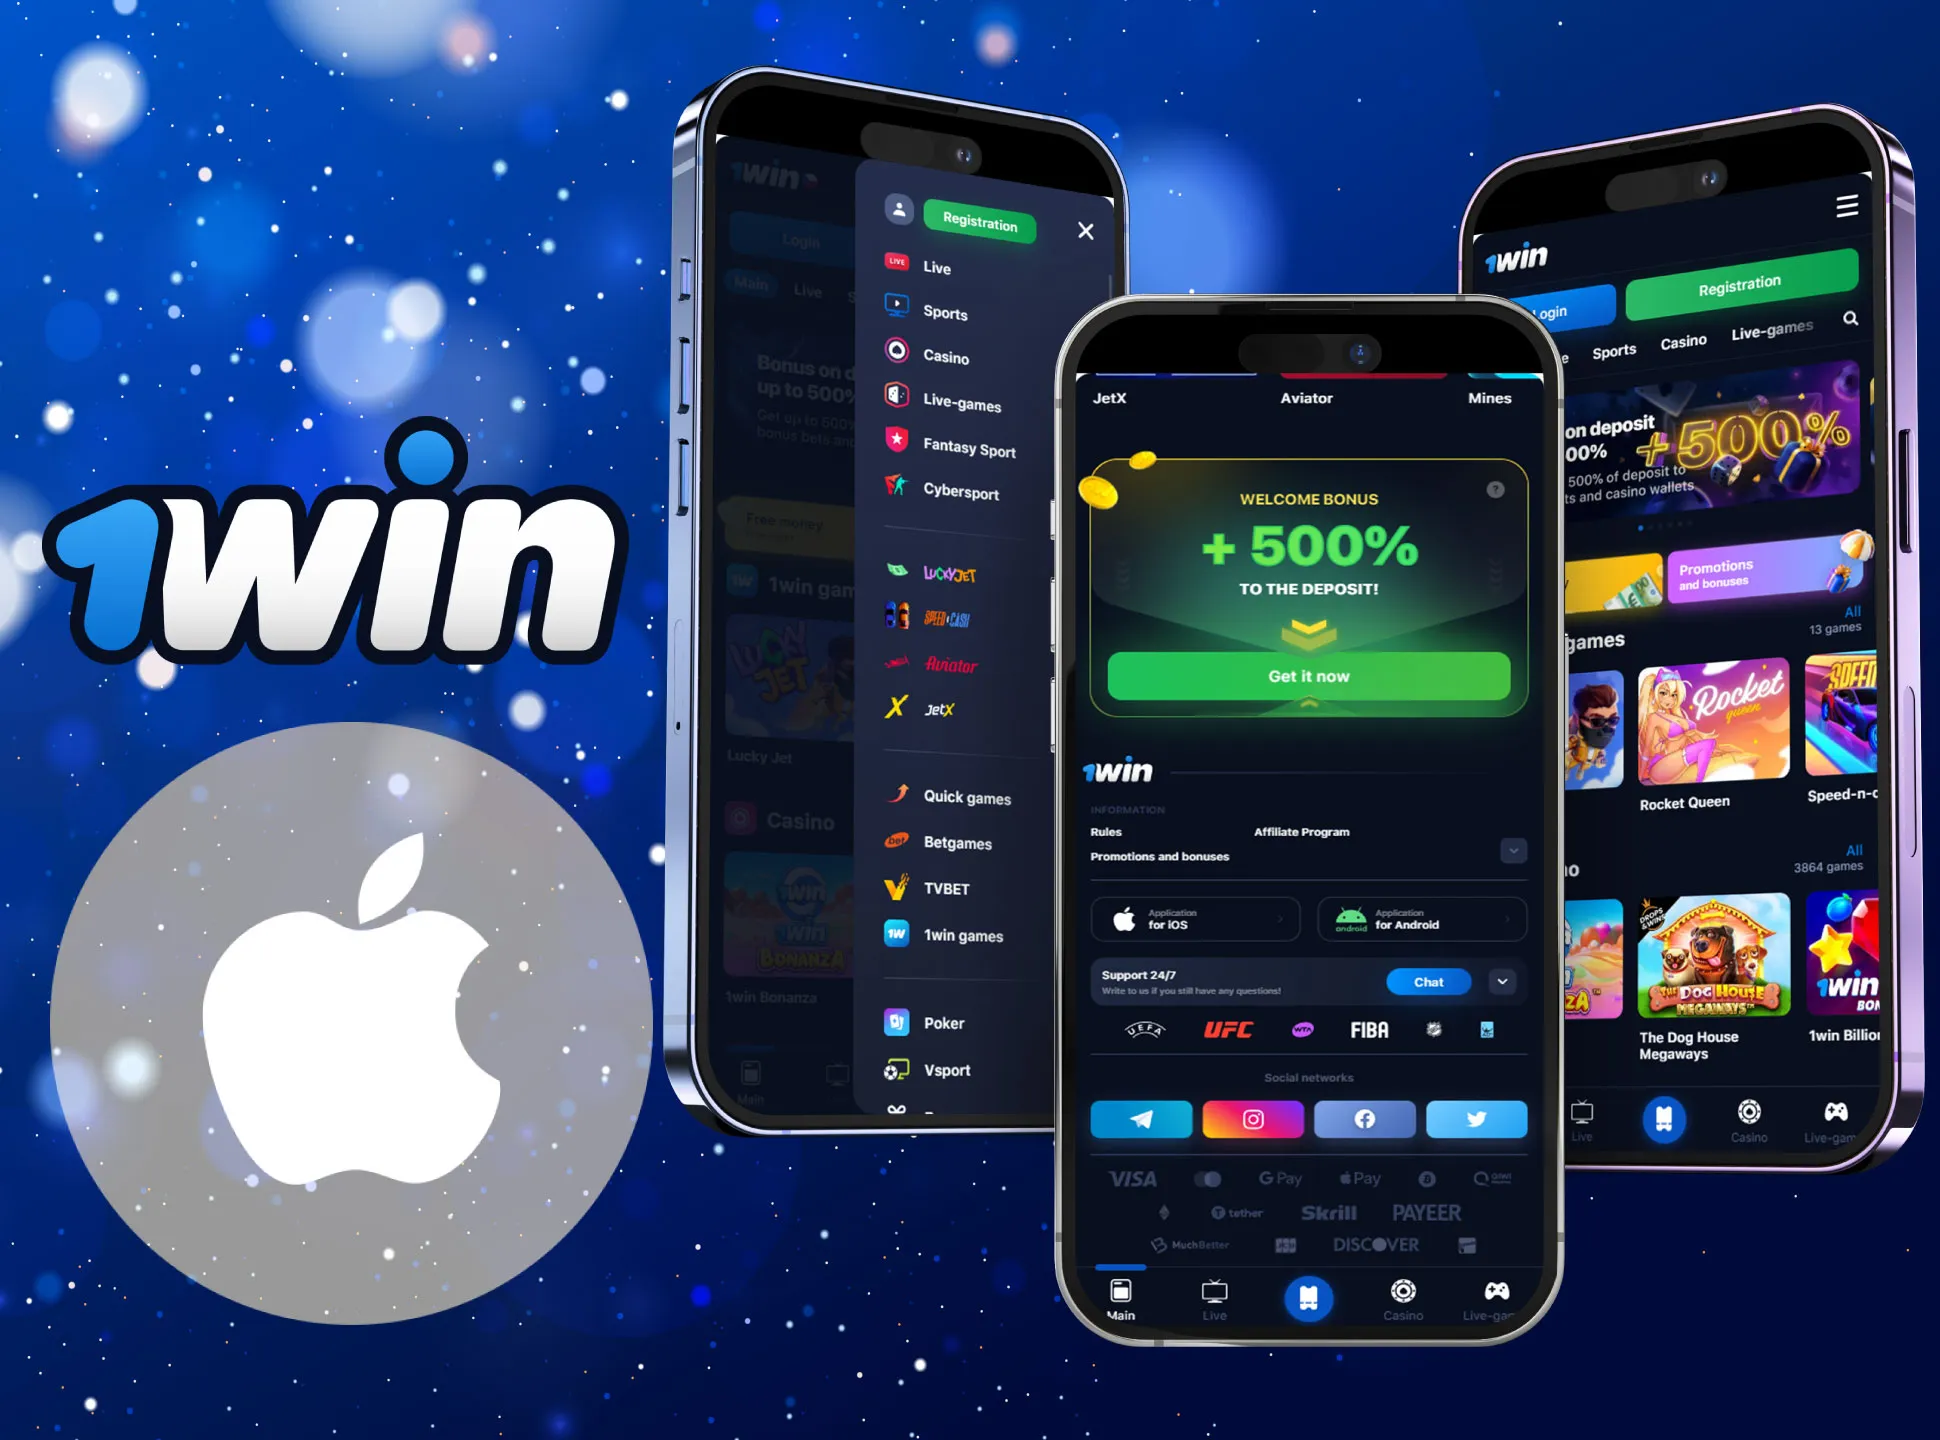 Install the 1win app on your iPhone or iPad.